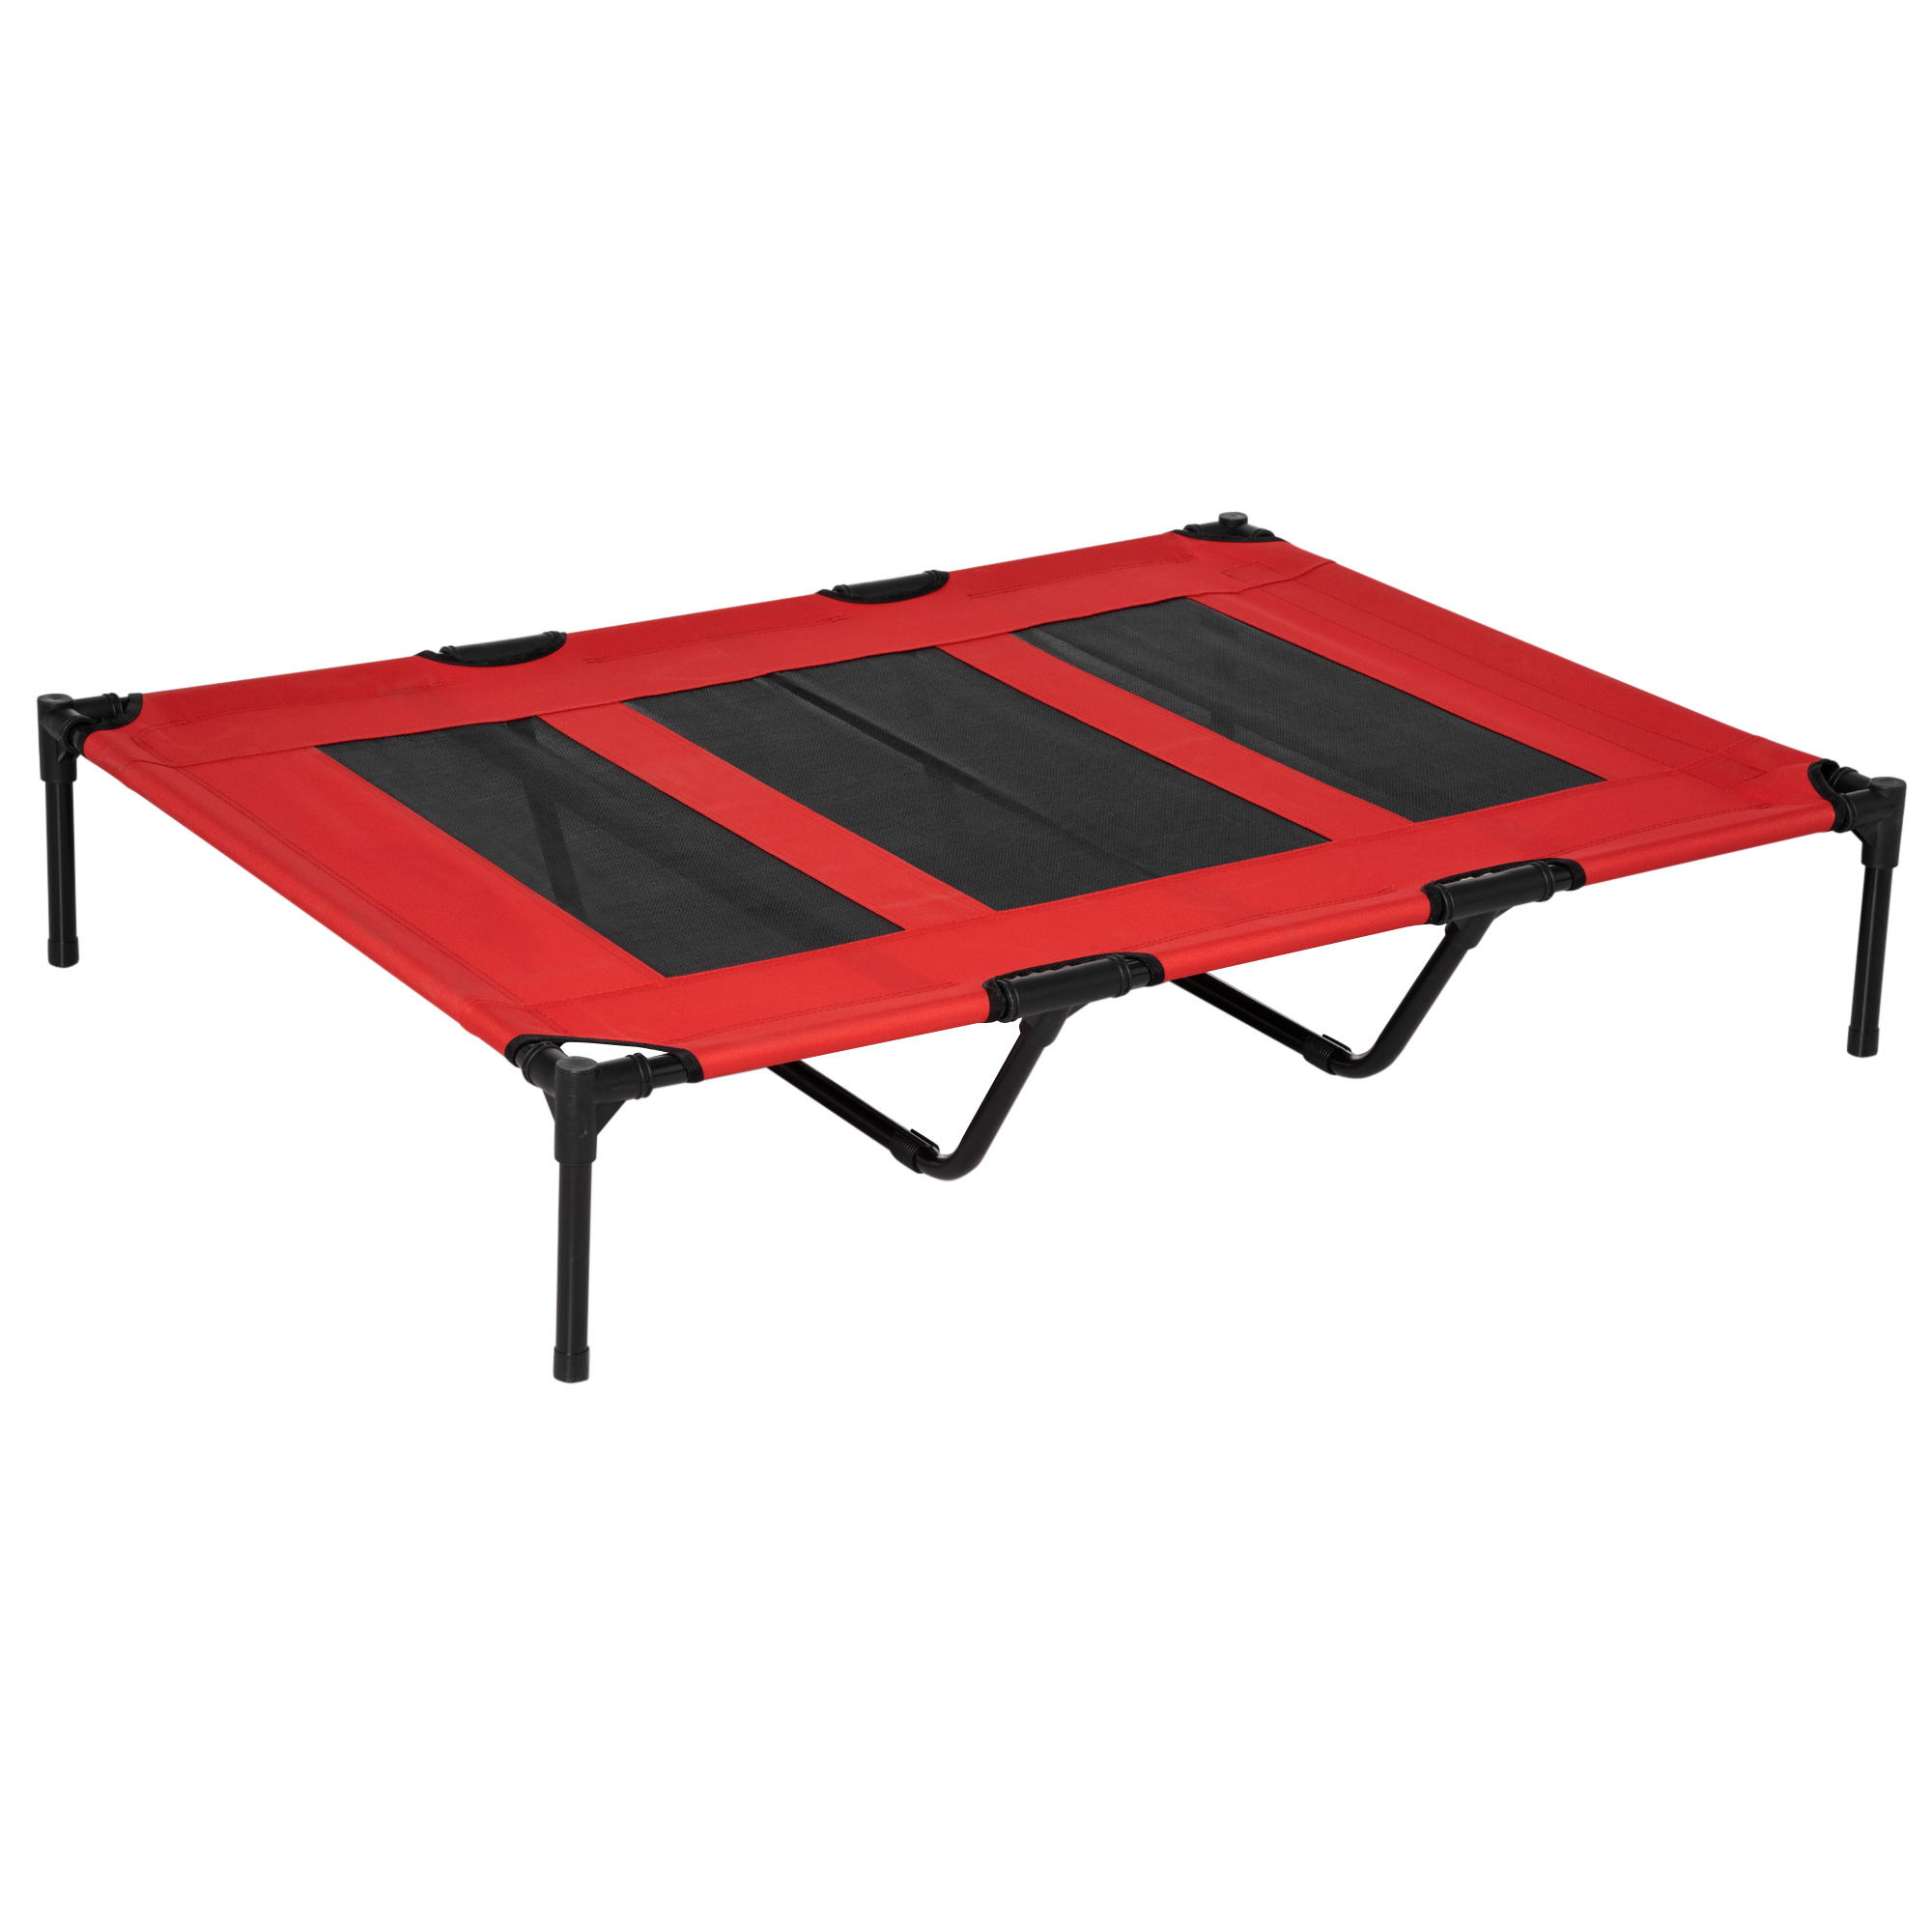 Pawhut 48" x 36" Elevated Folding Dog Cot Cooling Summer Pet Bed, Red - image 1 of 9